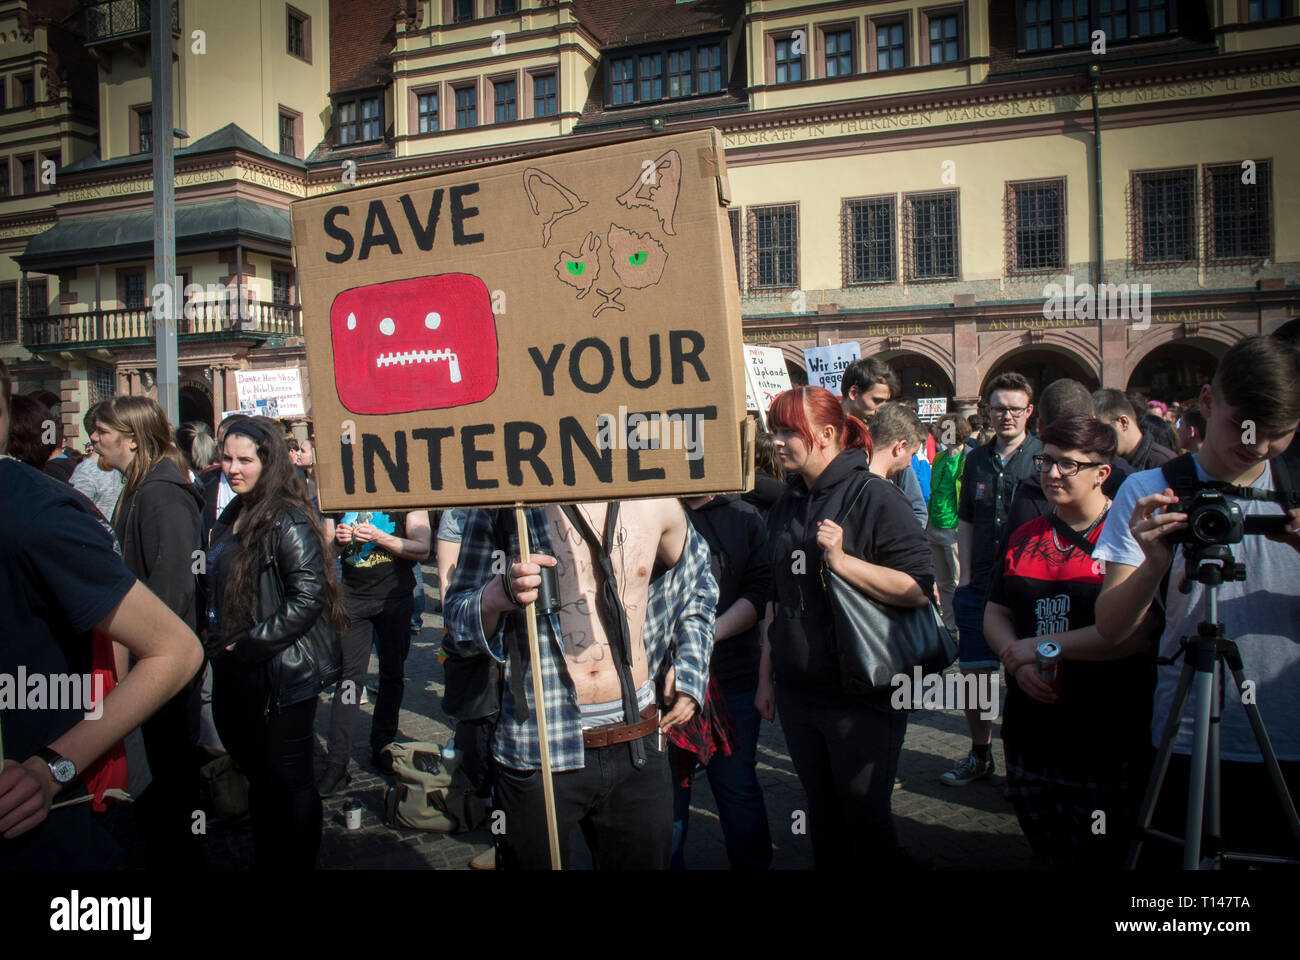 Save Your Internet Protest in Leipzig, Germany. Protesting against the Copyright Directive known as Article 13 officially called The European Union Directive on Copyright in the Digital Single Market, It requires the likes of YouTube, Facebook and Twitter to take more responsibility for copyrighted material being shared illegally on their platforms. It's known as Article 13 its most controversial serction. Critics claim it will have a detrimental impact on creators online.  Credit: Craig Stennett/Alamy Live News 23/3/2019 Leipzig, Germany Stock Photo